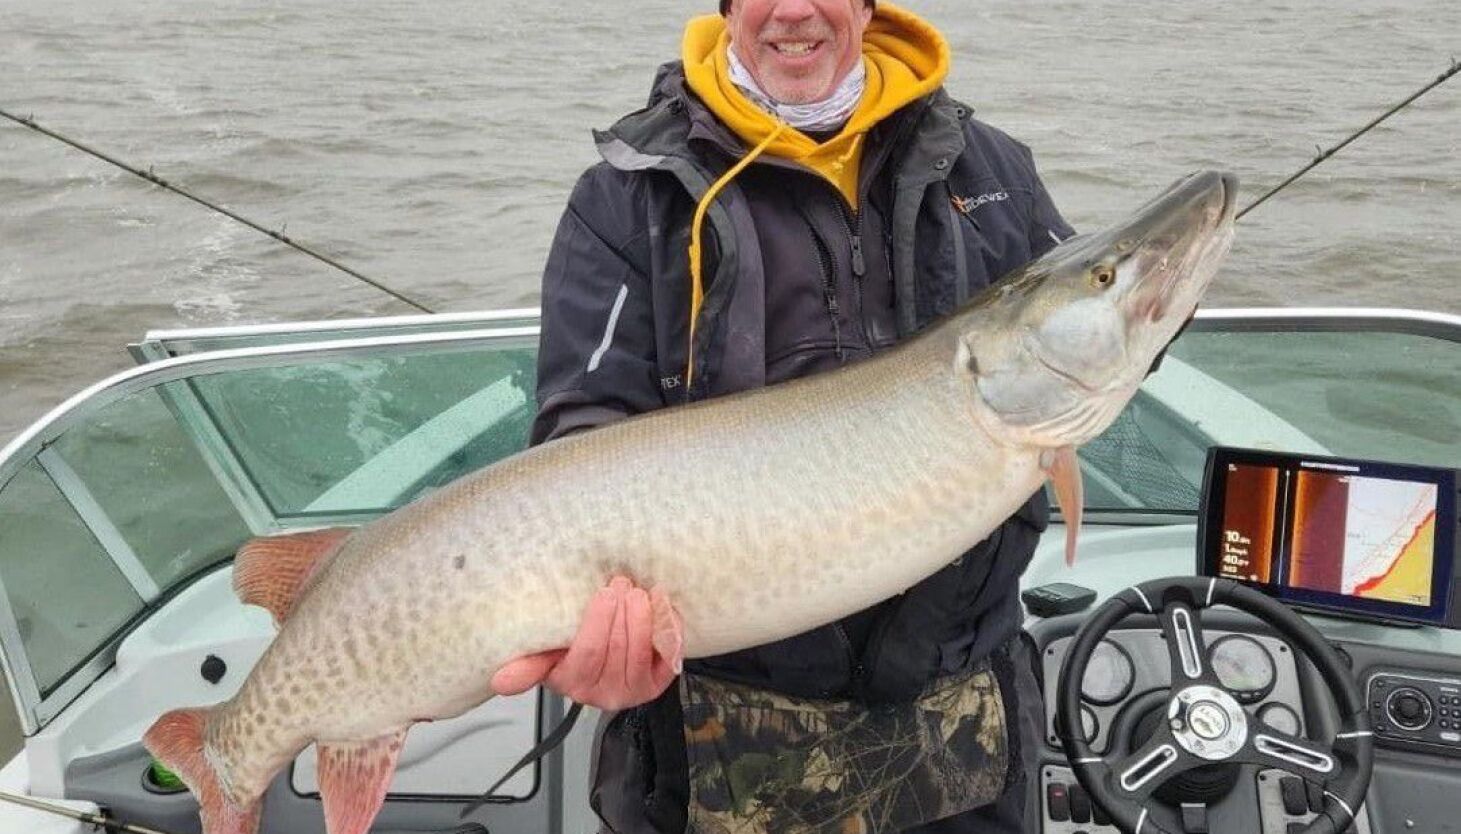 The enormous muskie, caught fishing in a walleye tournament, is the surprise fish of a lifetime